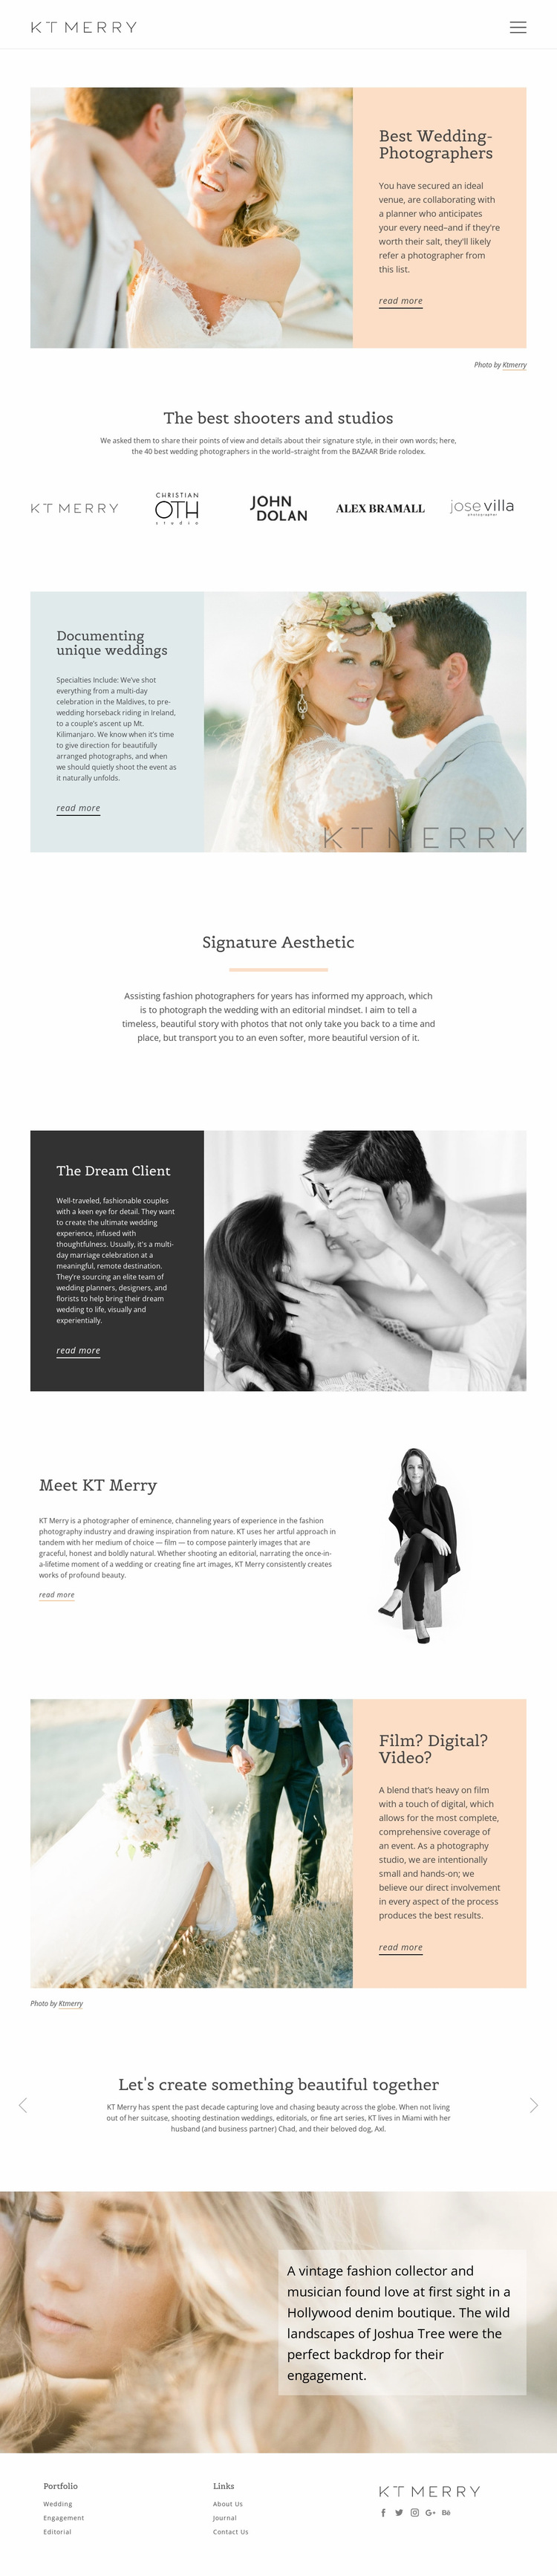 Shooters for special wedding Website Builder Templates